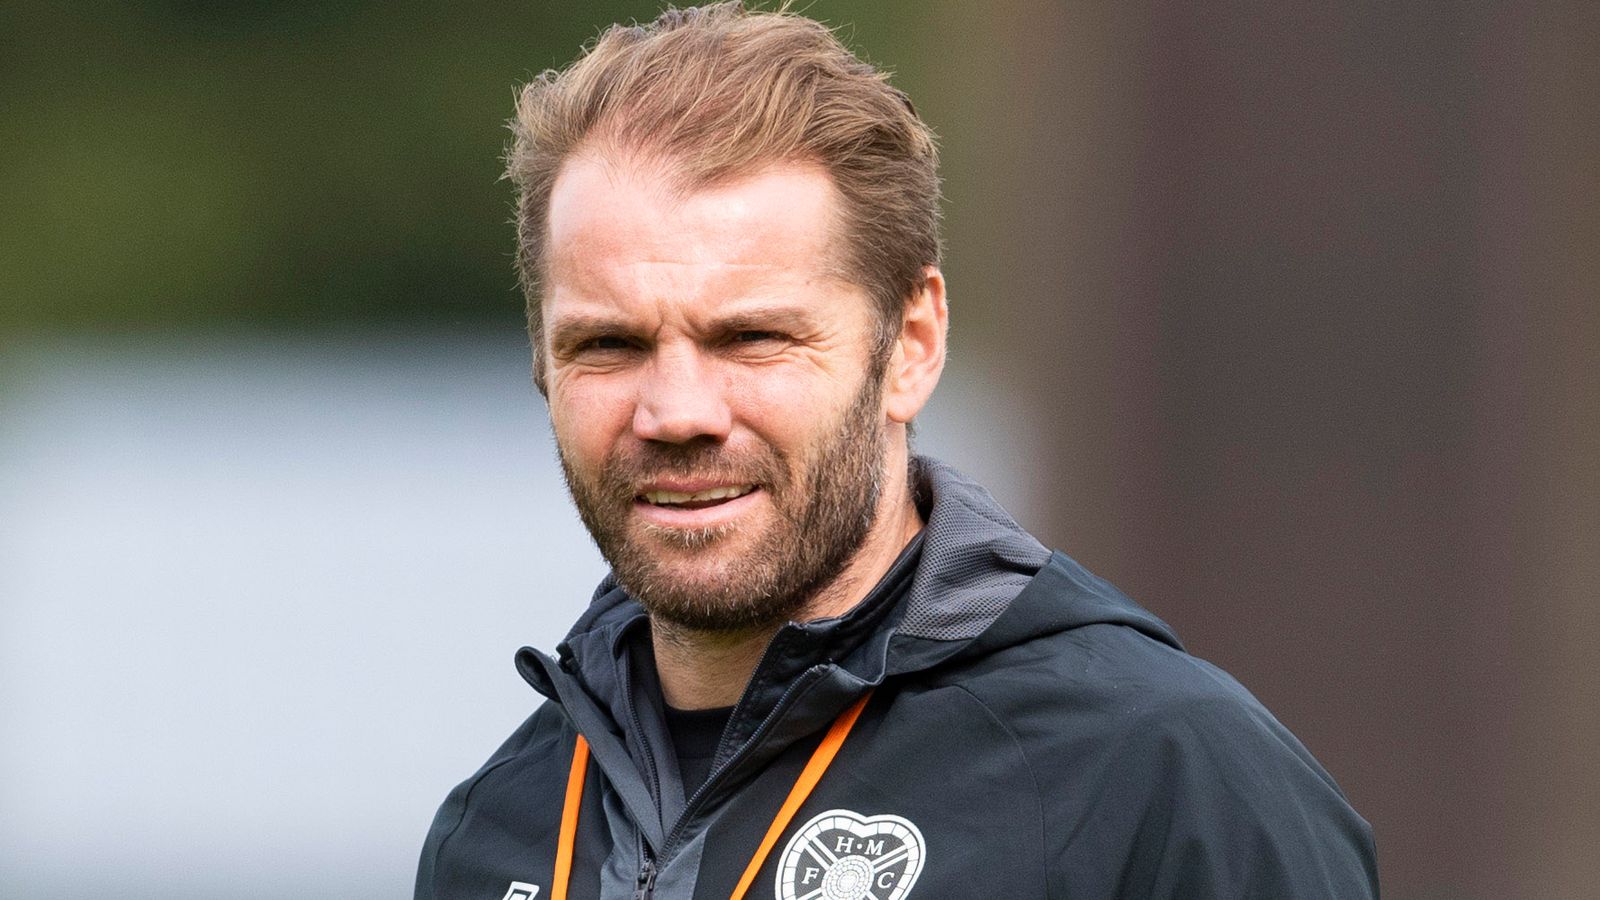 Hearts: Robbie Neilson hopes full Tynecastle Park can help seal Europa League play-off win